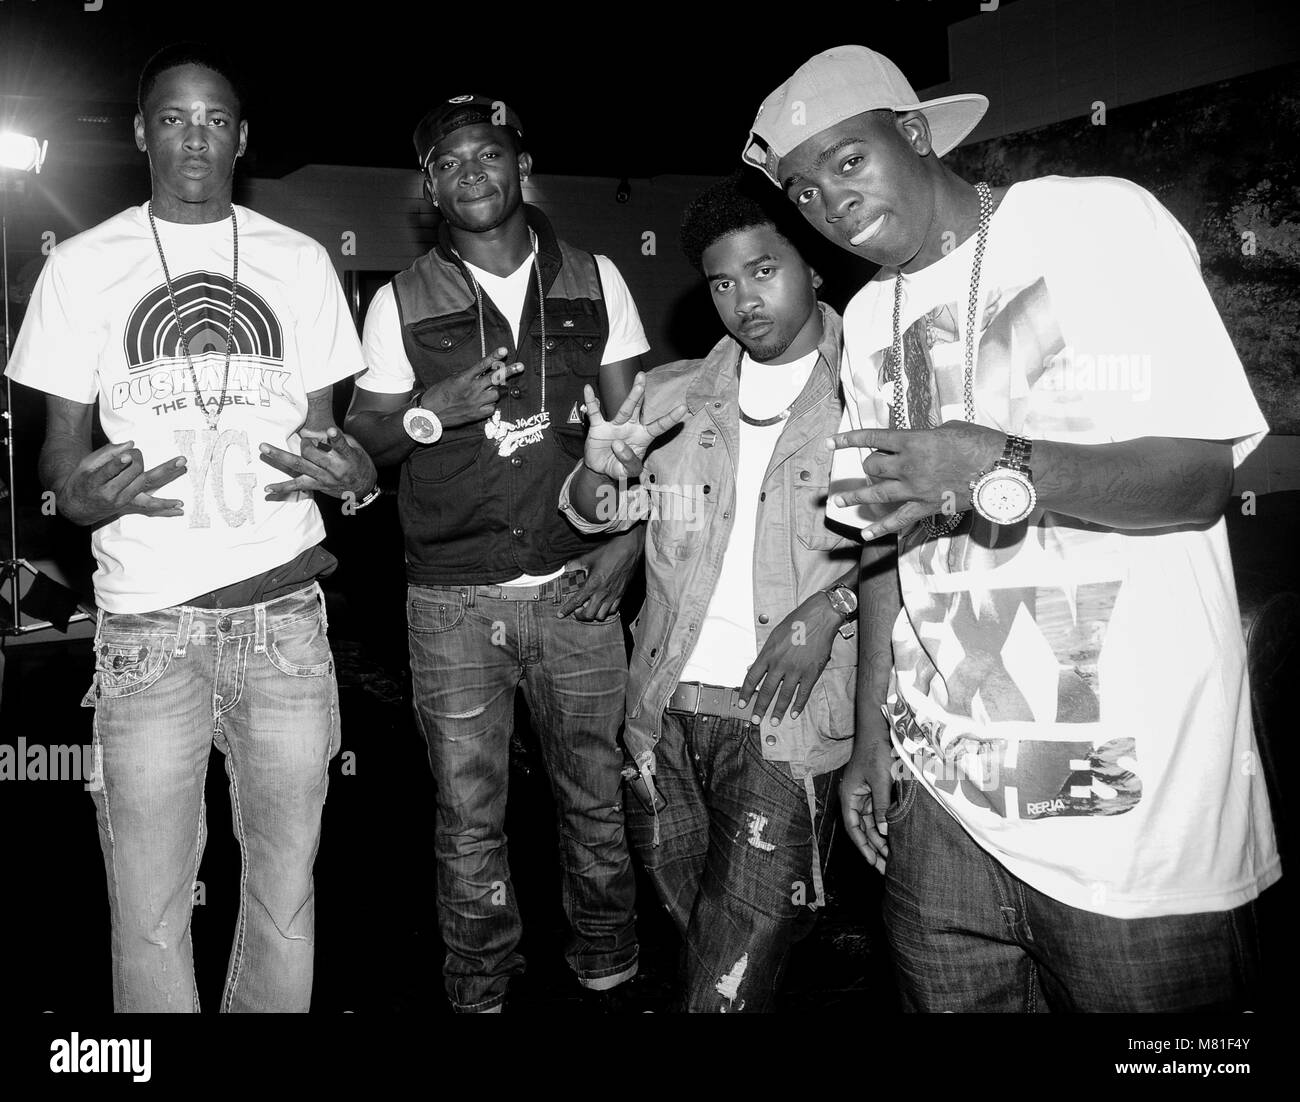 (L-R) YG, O.T. Genasis, Mann and Kidd Kidd at the Hot Rod 'Hot GIrl' music video in Hollywood, California. Stock Photo